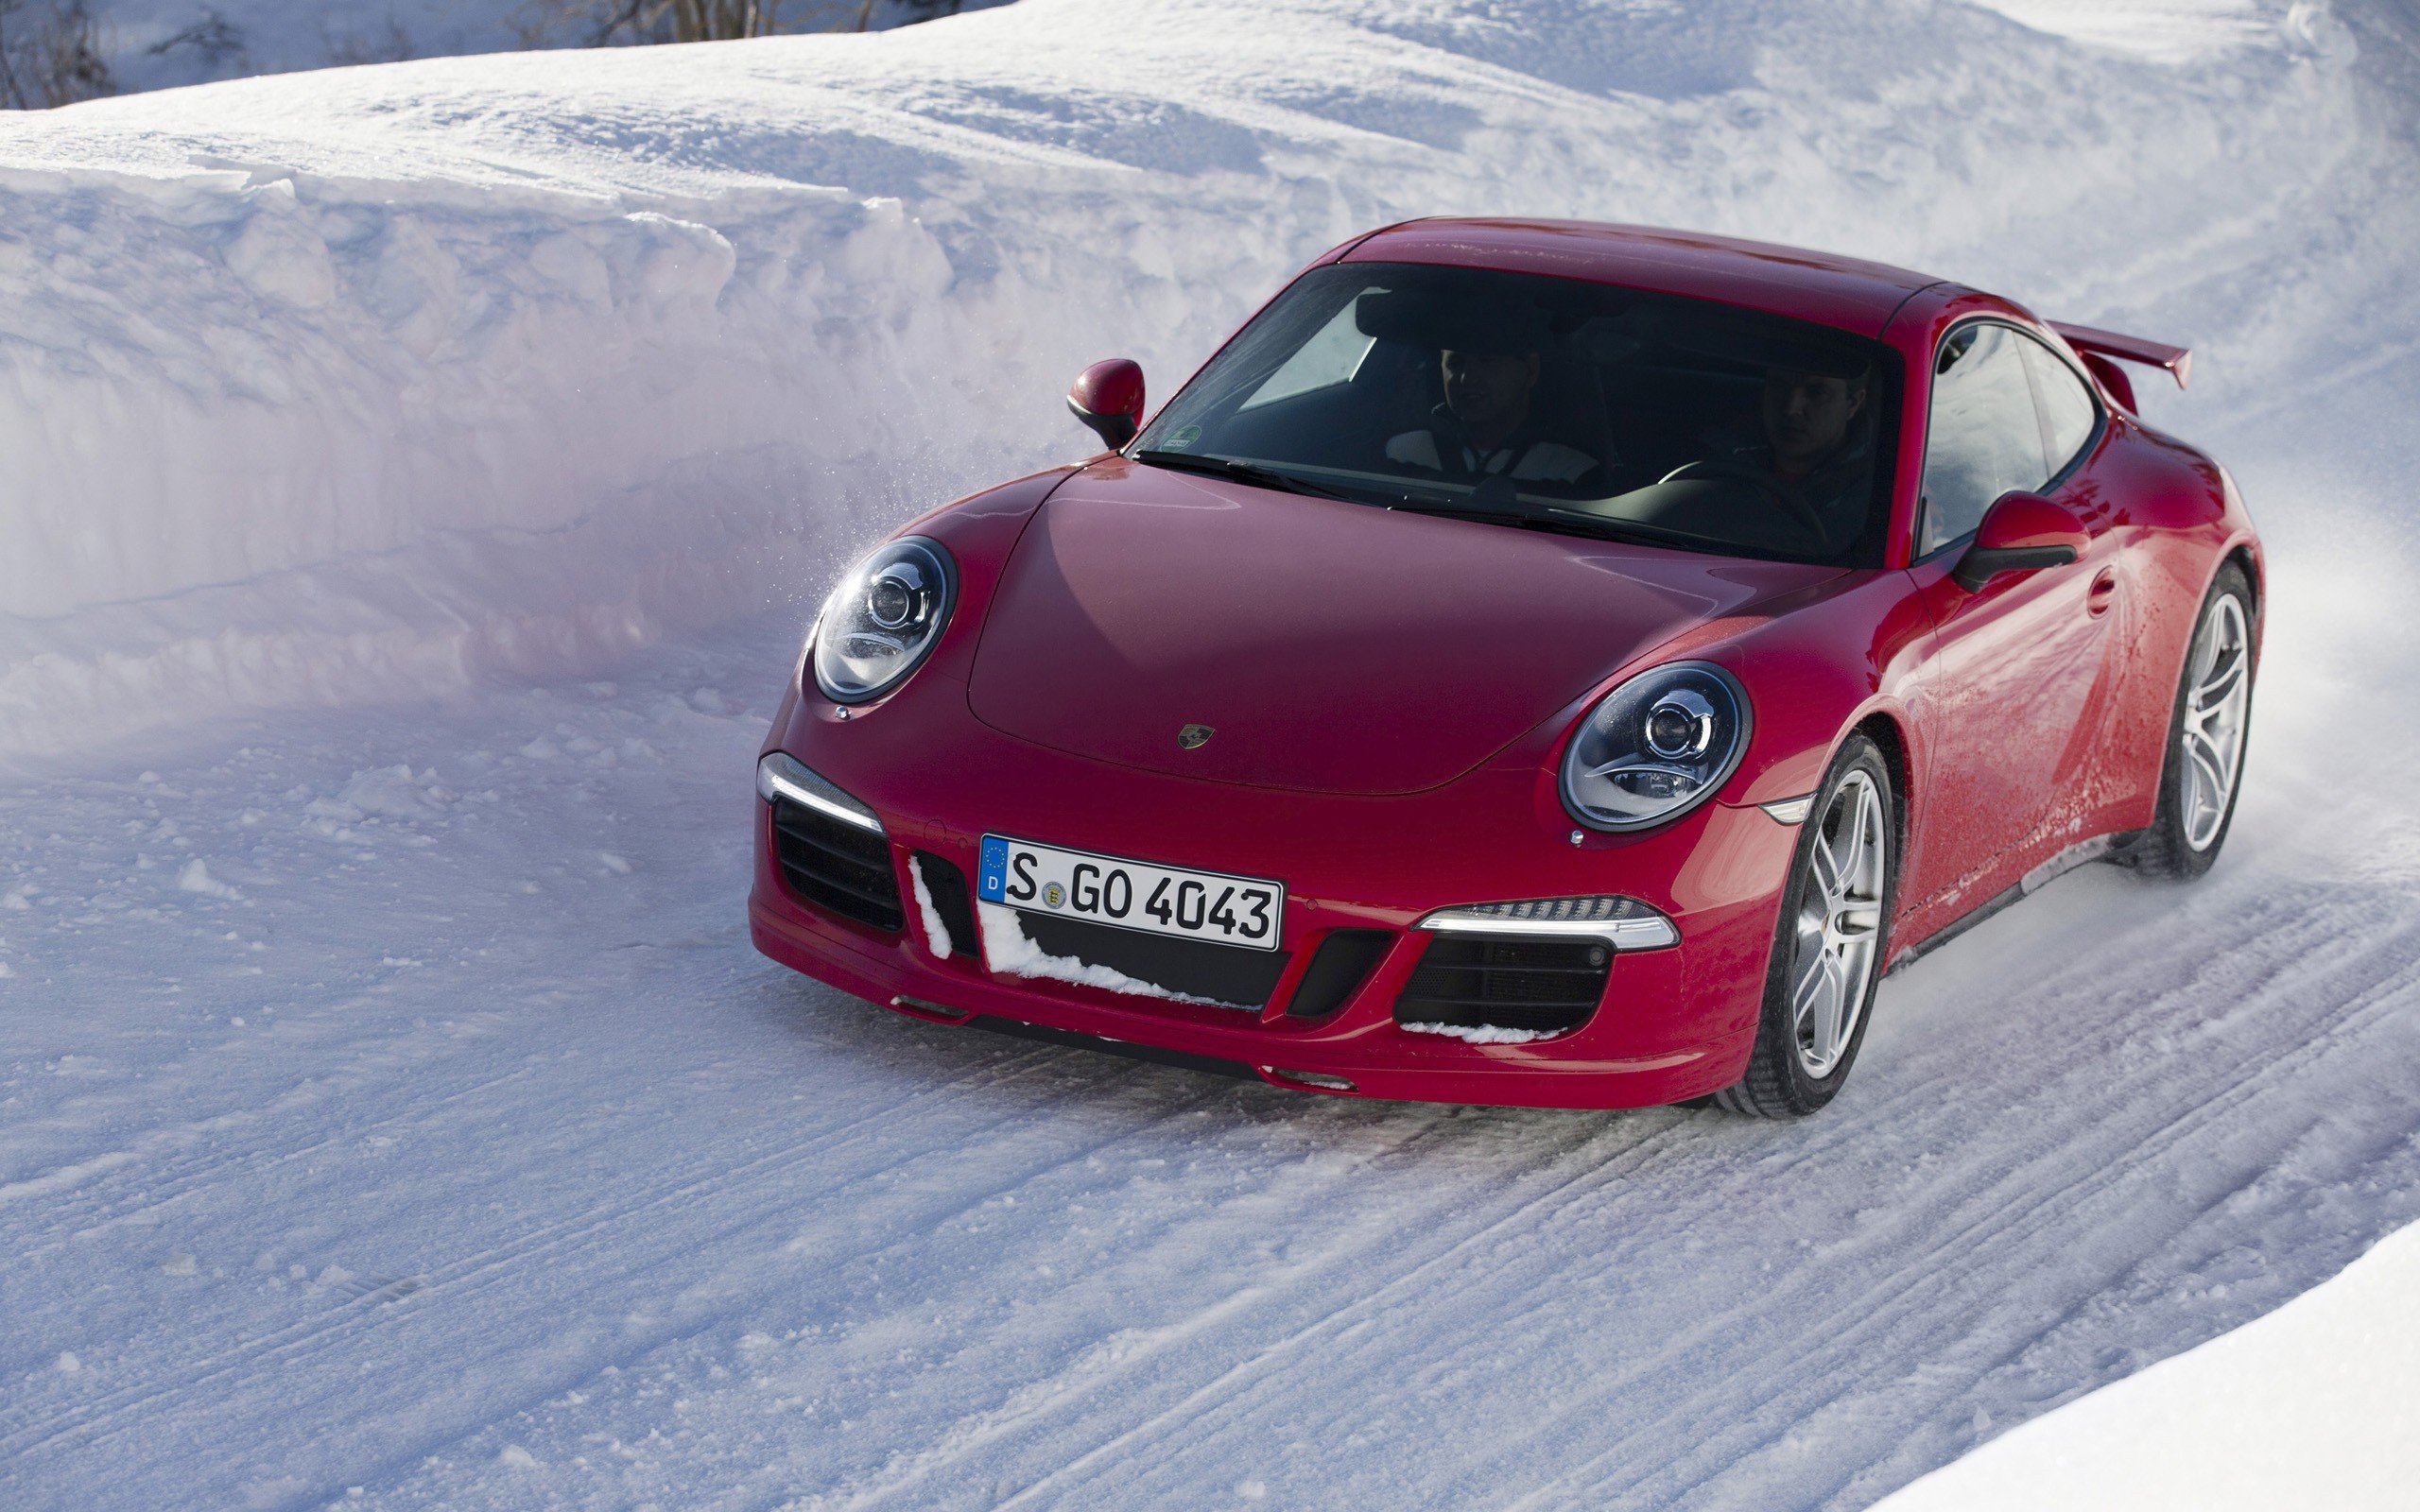 ice, Snow, Red, Cars, Driving, Porsche, 911 Wallpapers HD / Desktop and